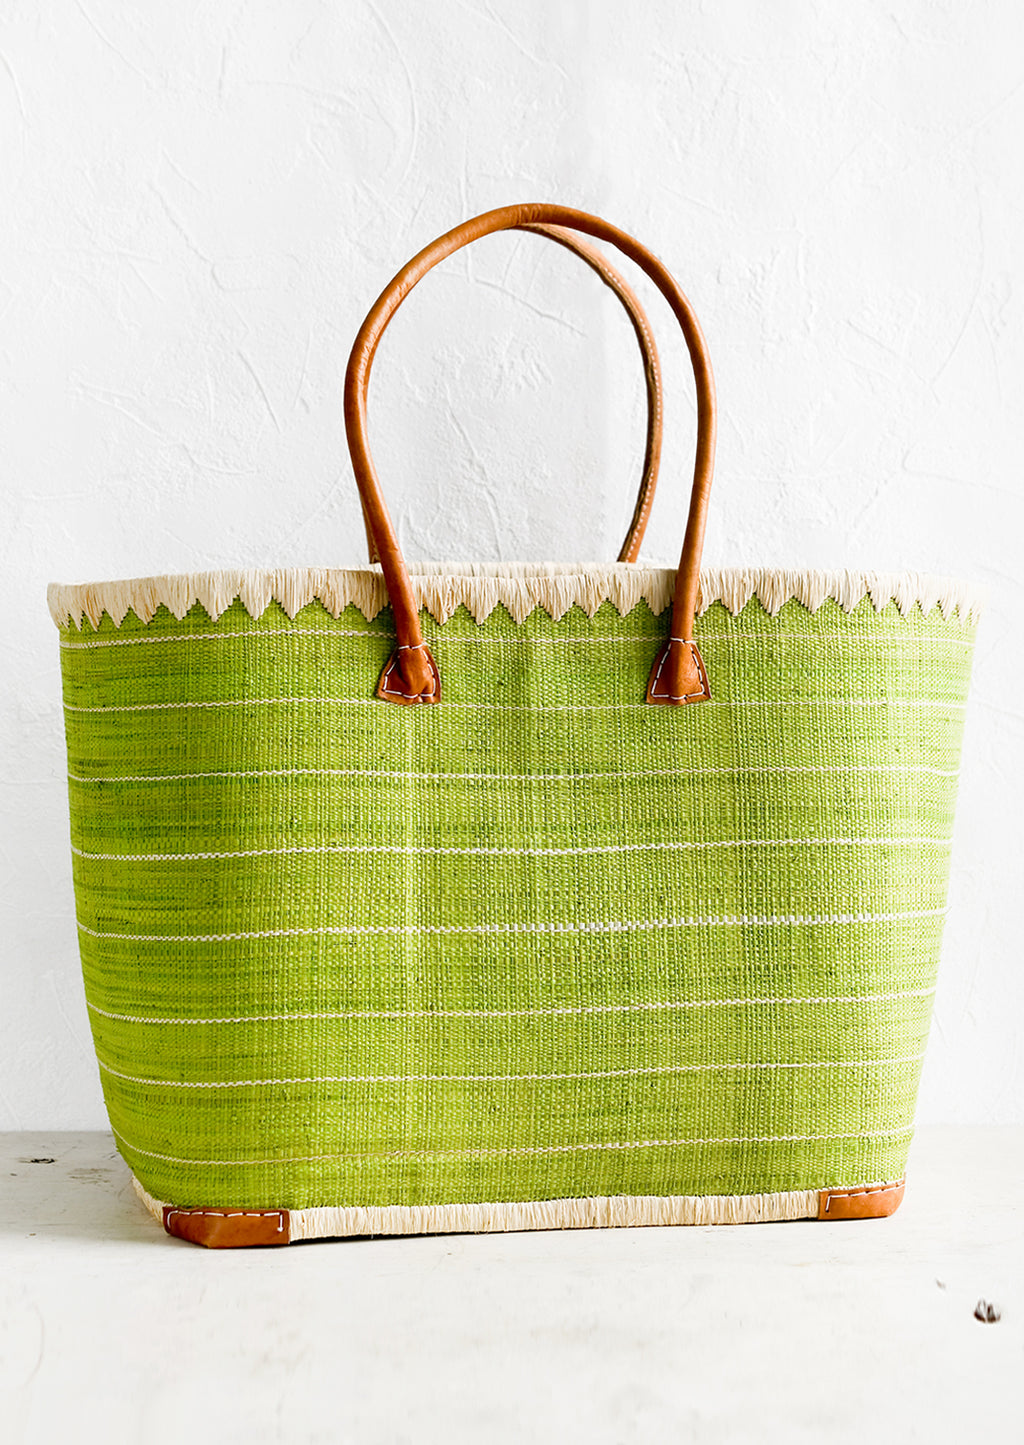 1: A raffia tote bag in green stripes with leather handles.